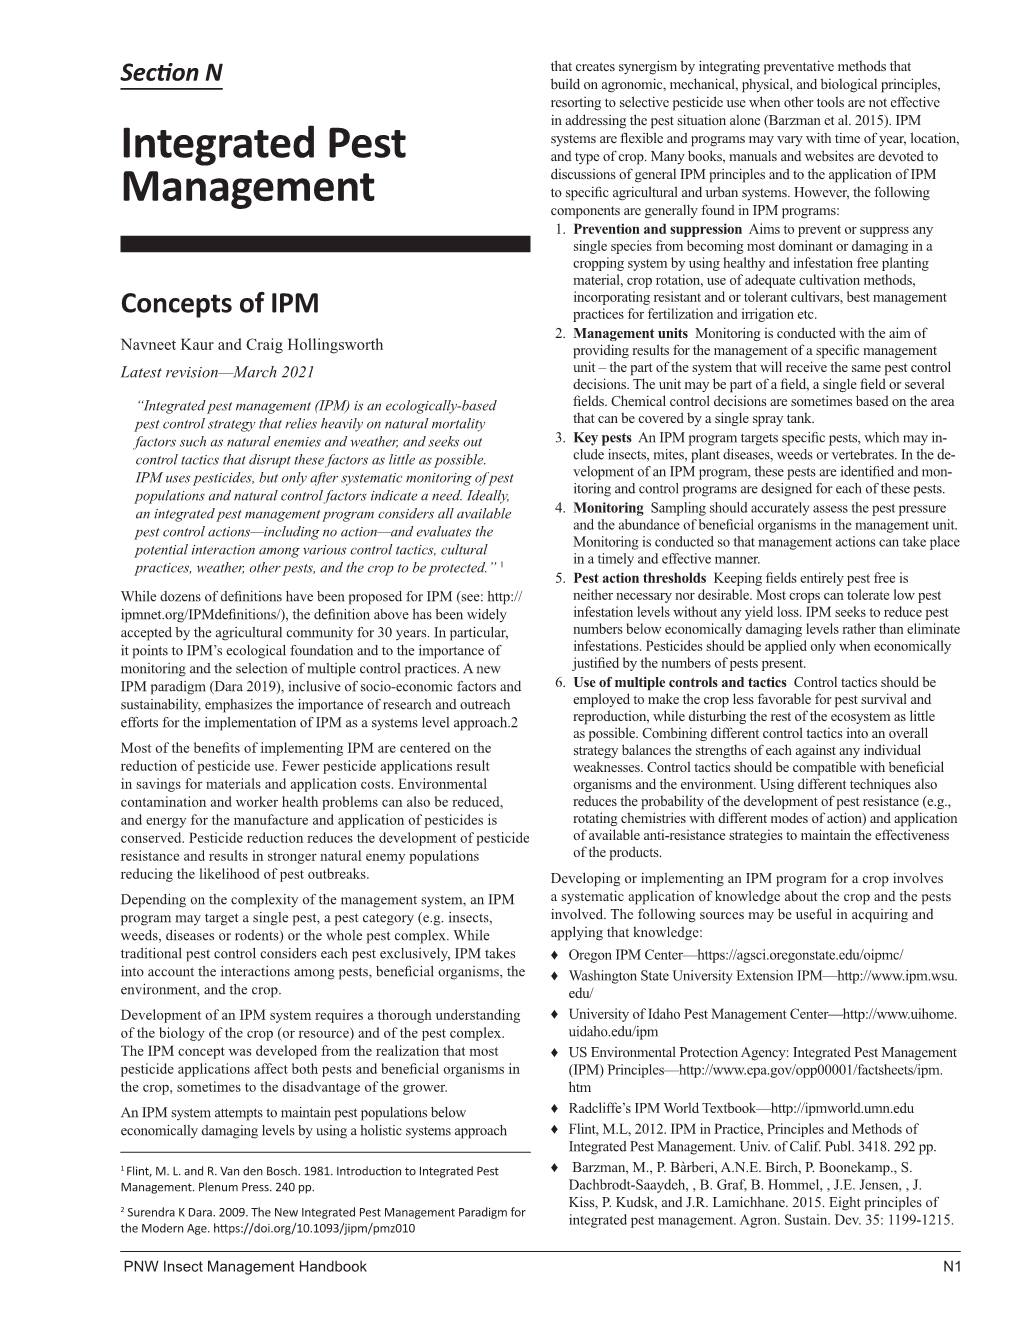 Integrated Pest Management (IPM) Is an Ecologically-Based Fields